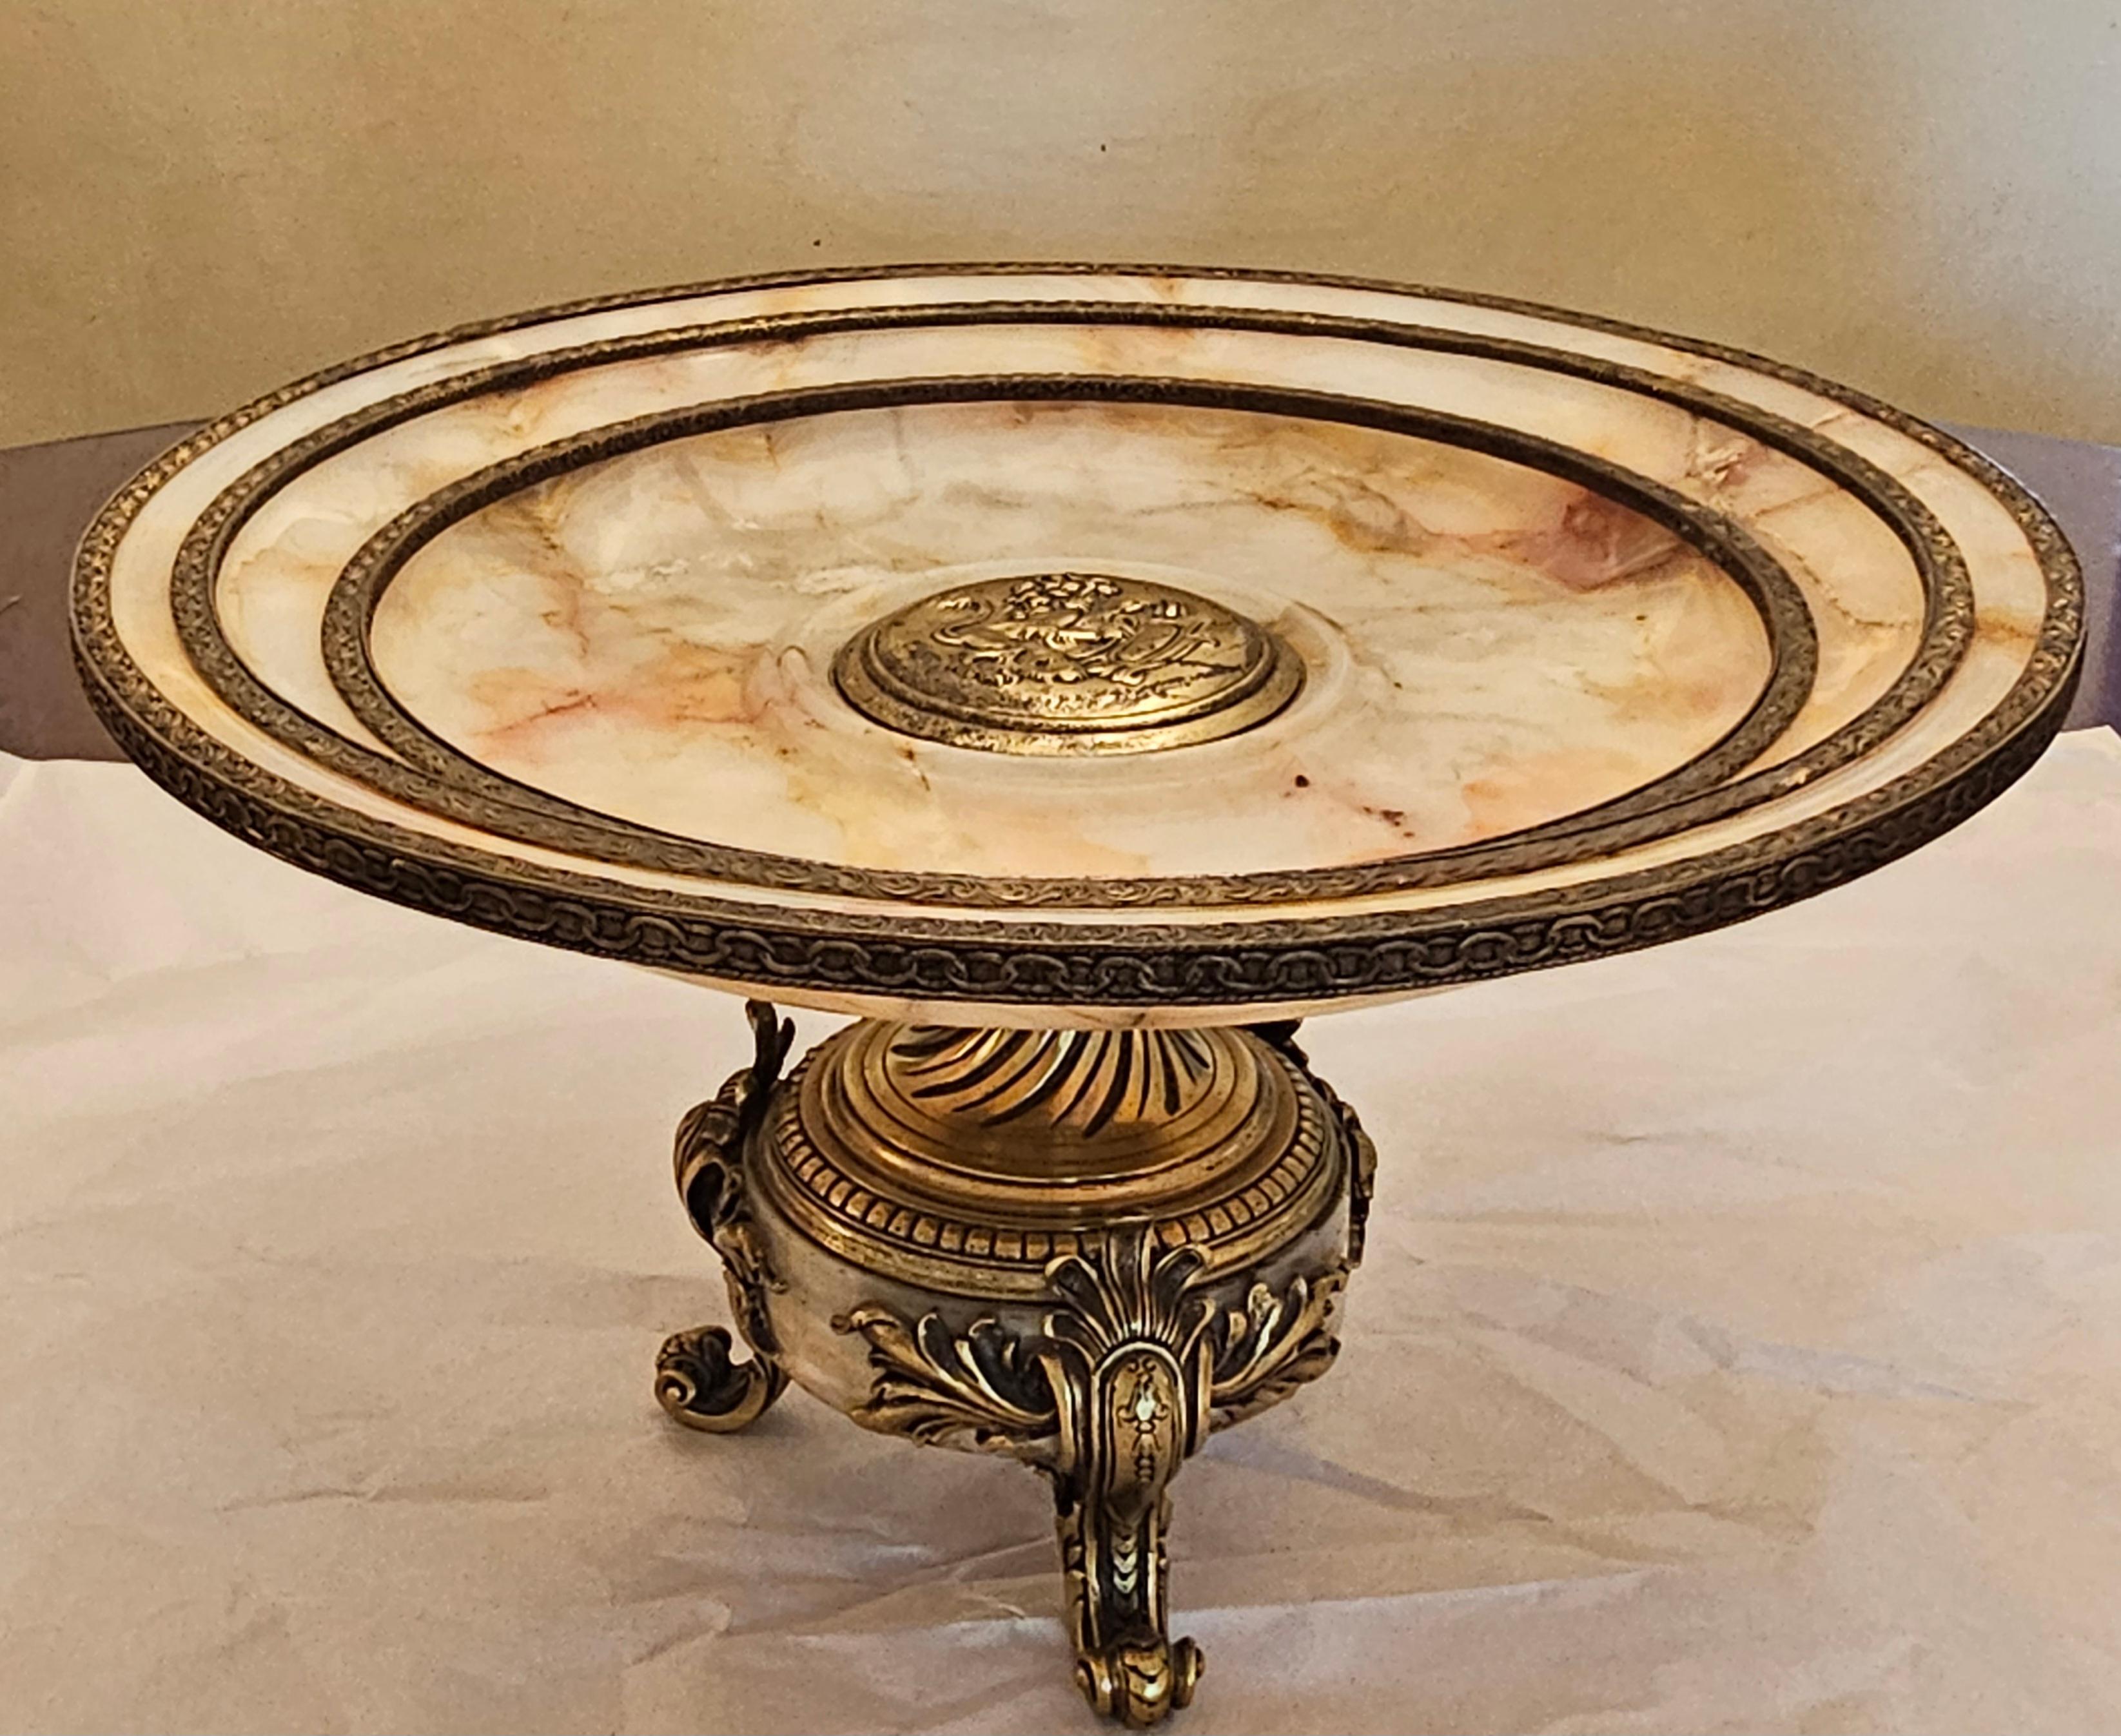 An early 20th century Louis XV Style bronze and marble centerpiece / epergne in very good condition. Measures 15.25